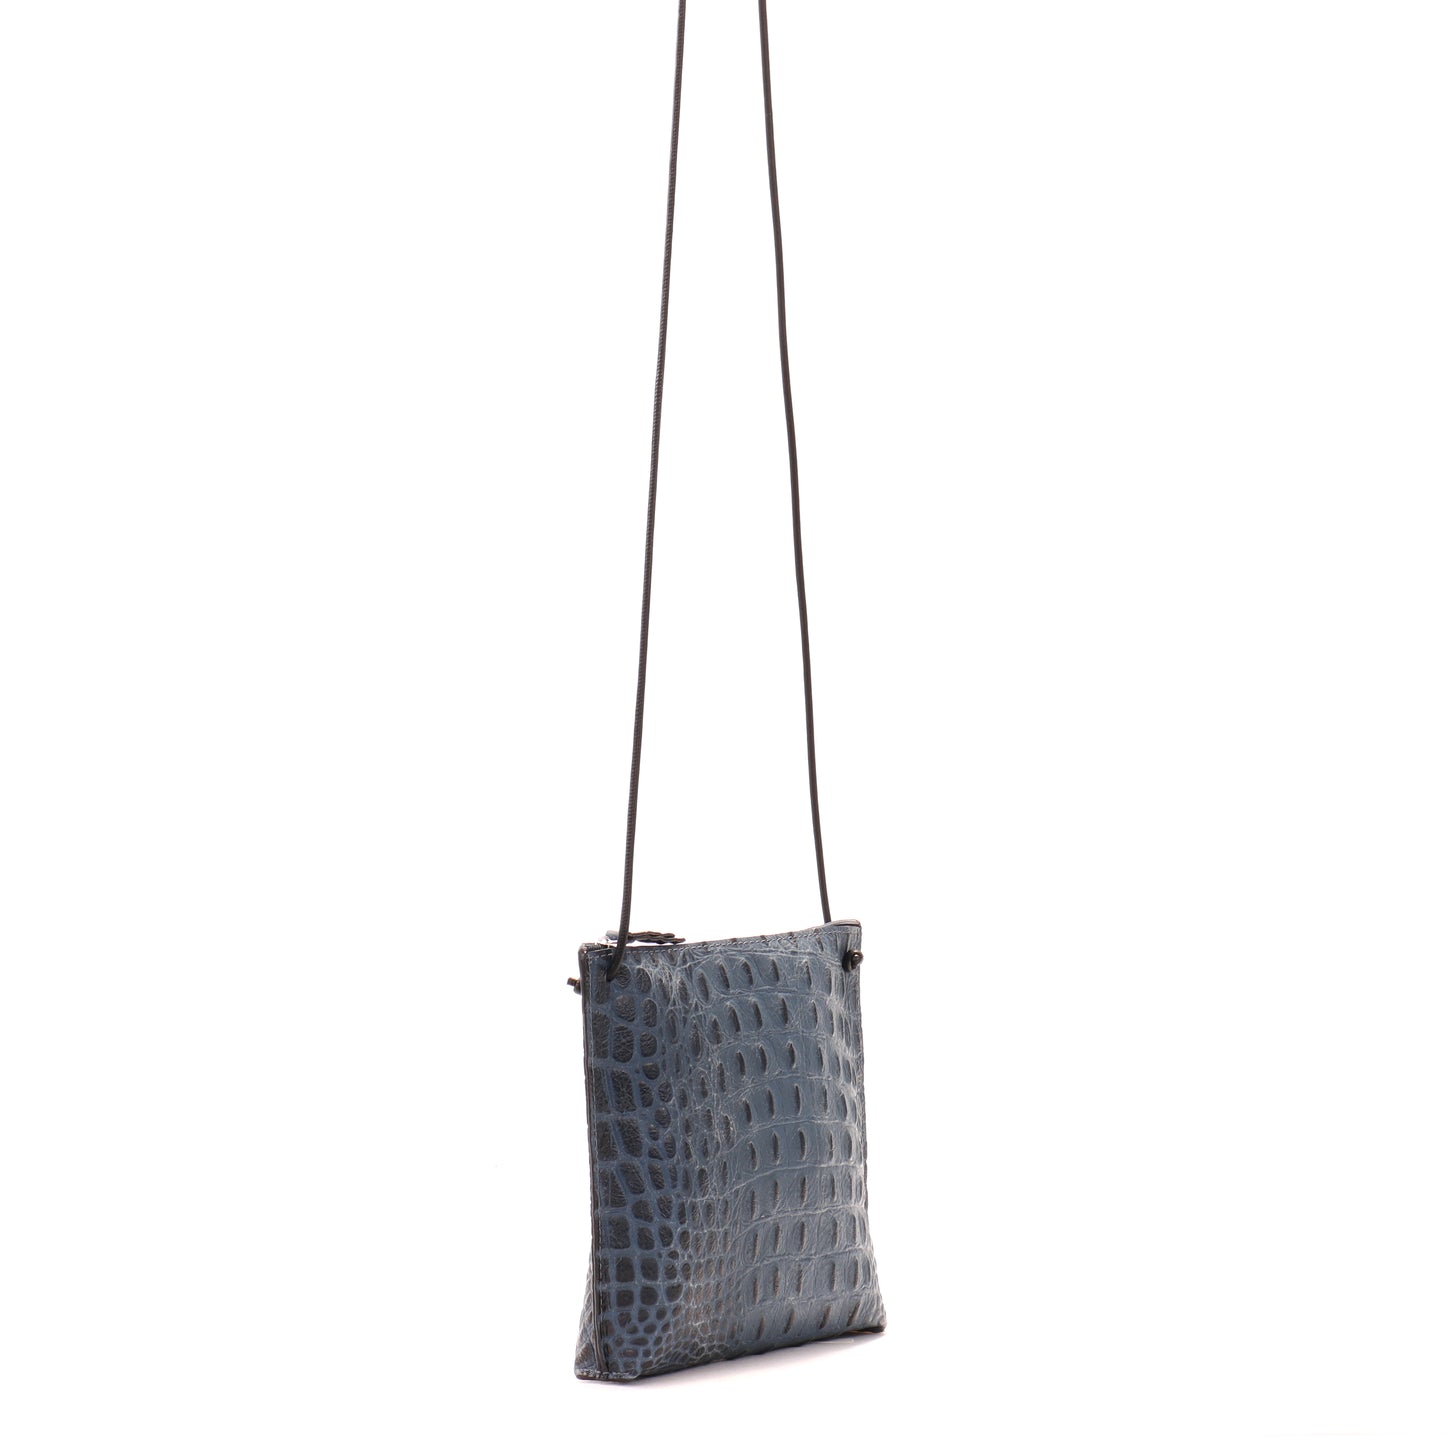 STRAPPY POUCH NAVY EMBOSSED CROC